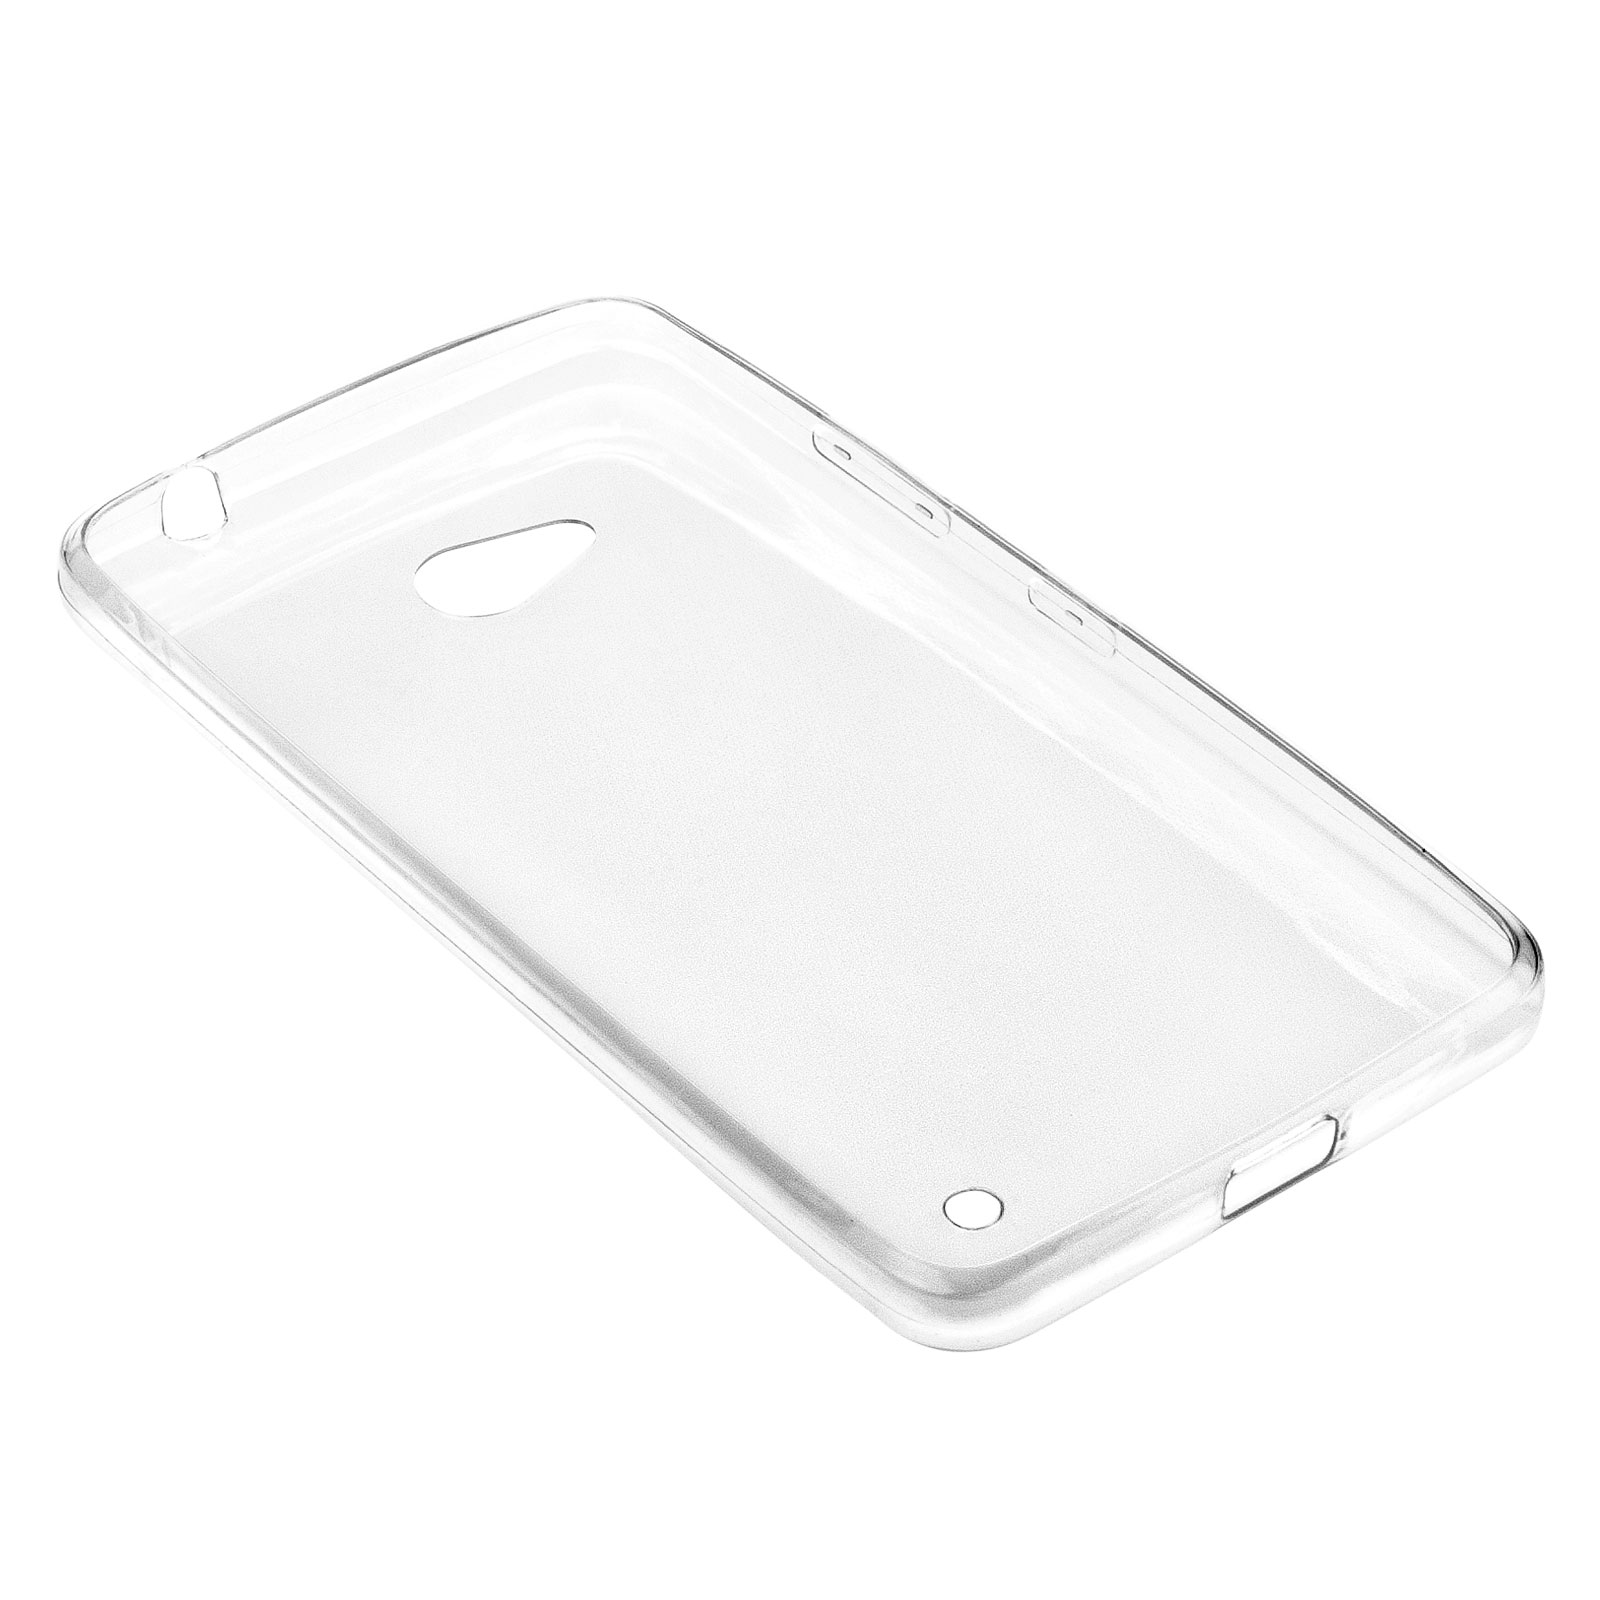 Yousave Accessories Microsoft Lumia 640 Ultra Thin Clear Gel Case